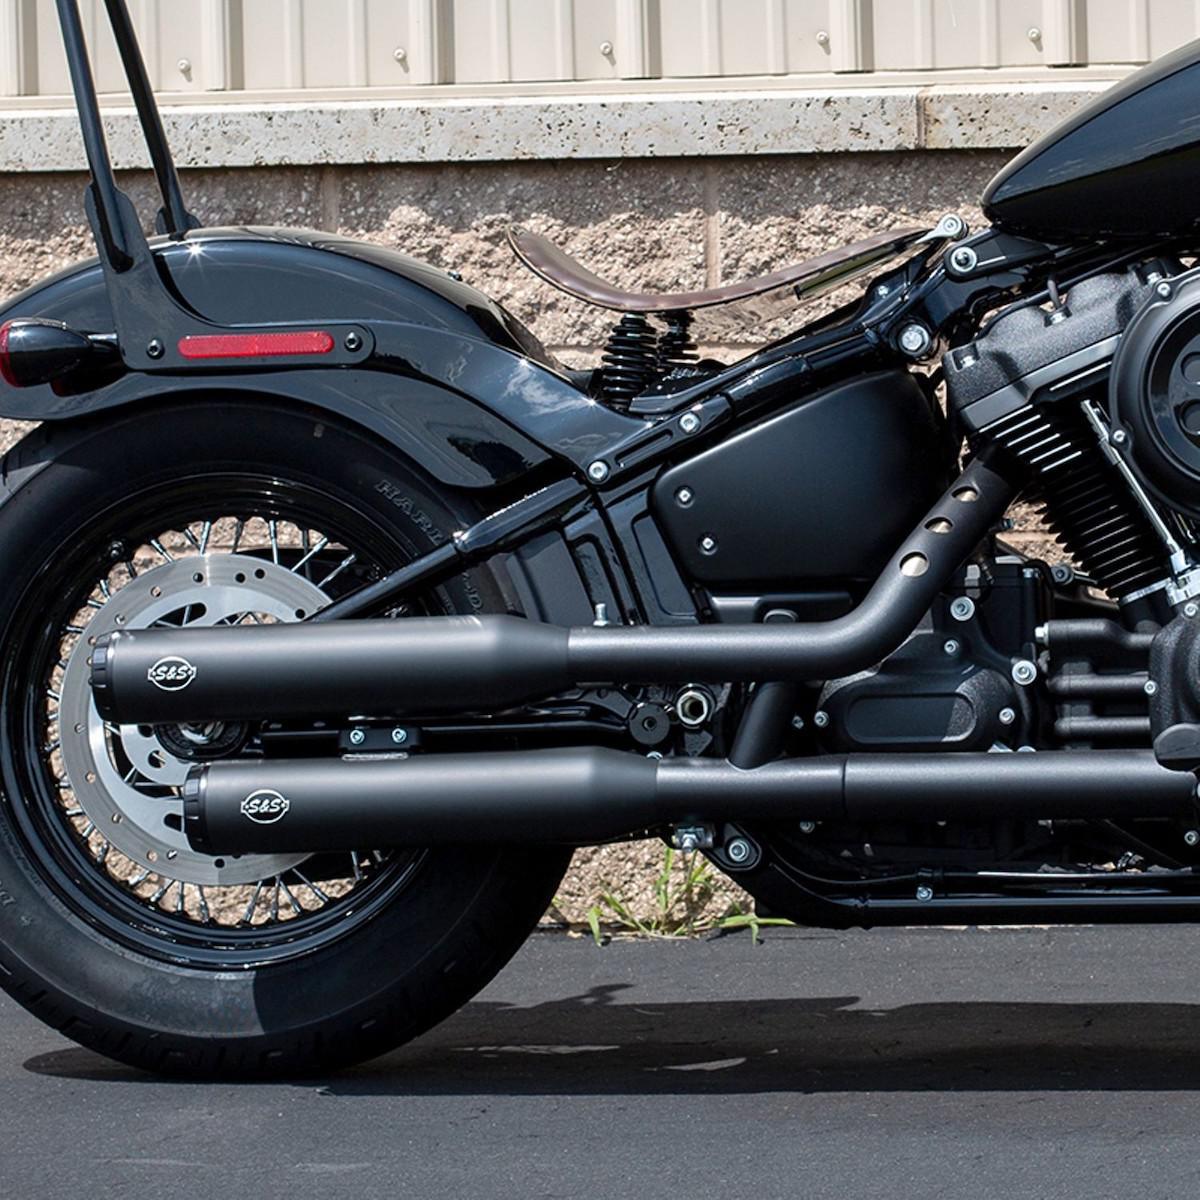 S&S CYCLE - Grand National and Slash Cut Slip Ons for M8 HD Softail Models